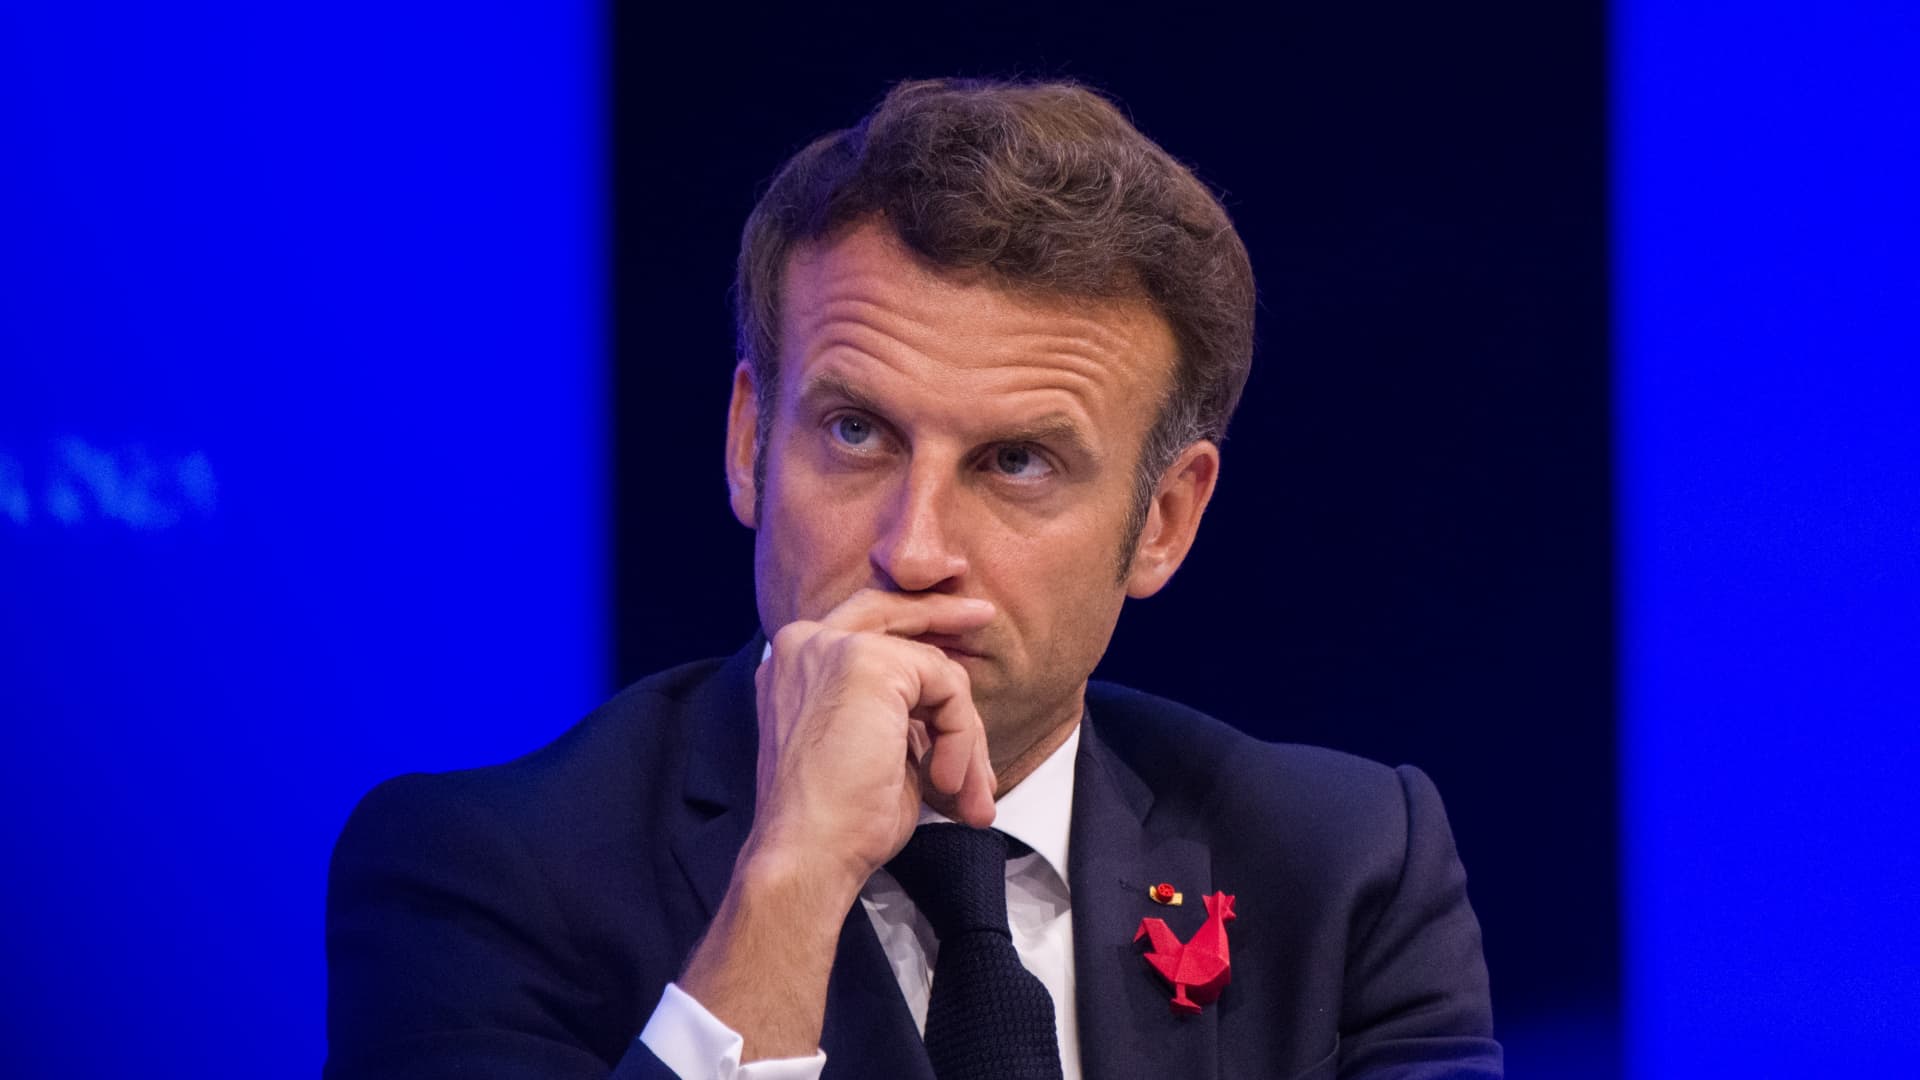 Emmanuel Macron, France's president, will have a more difficult time in his second mandate after losing his parliament majority.